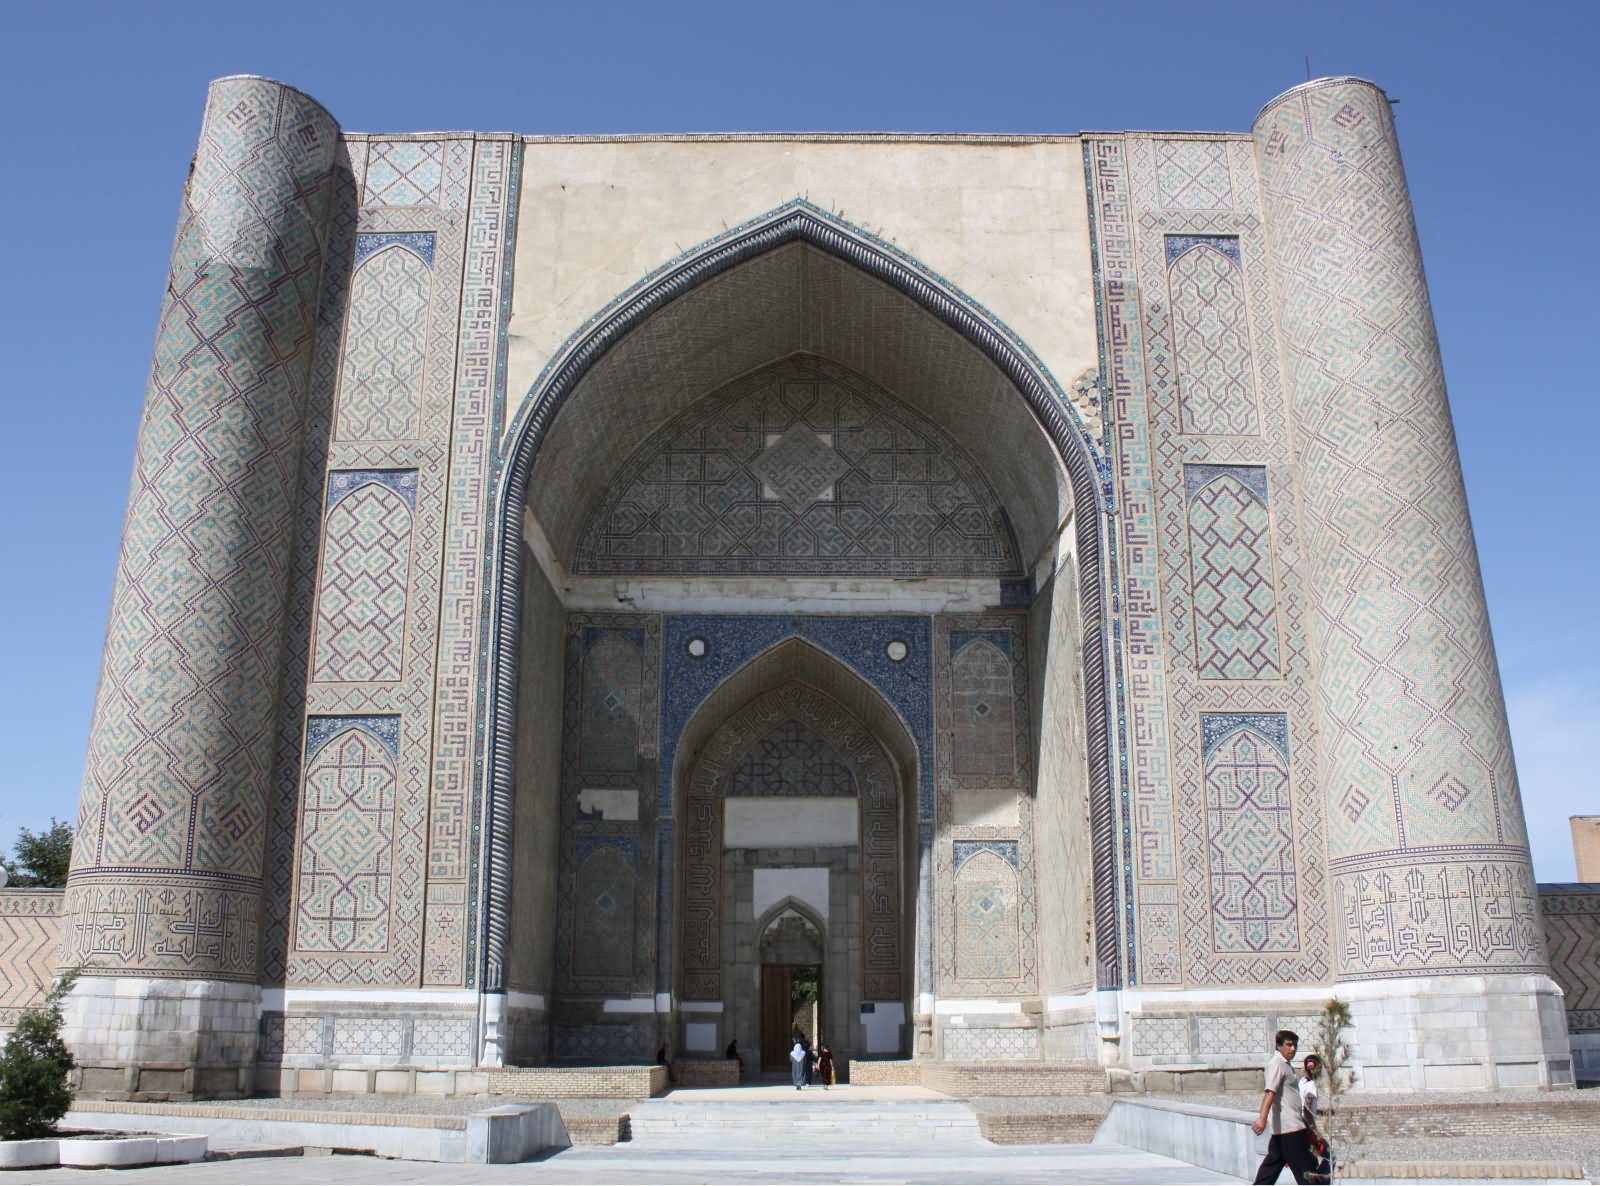 40 Amazing Pictures And Images Of The Bibi Khanym Mosque In Uzbekistan